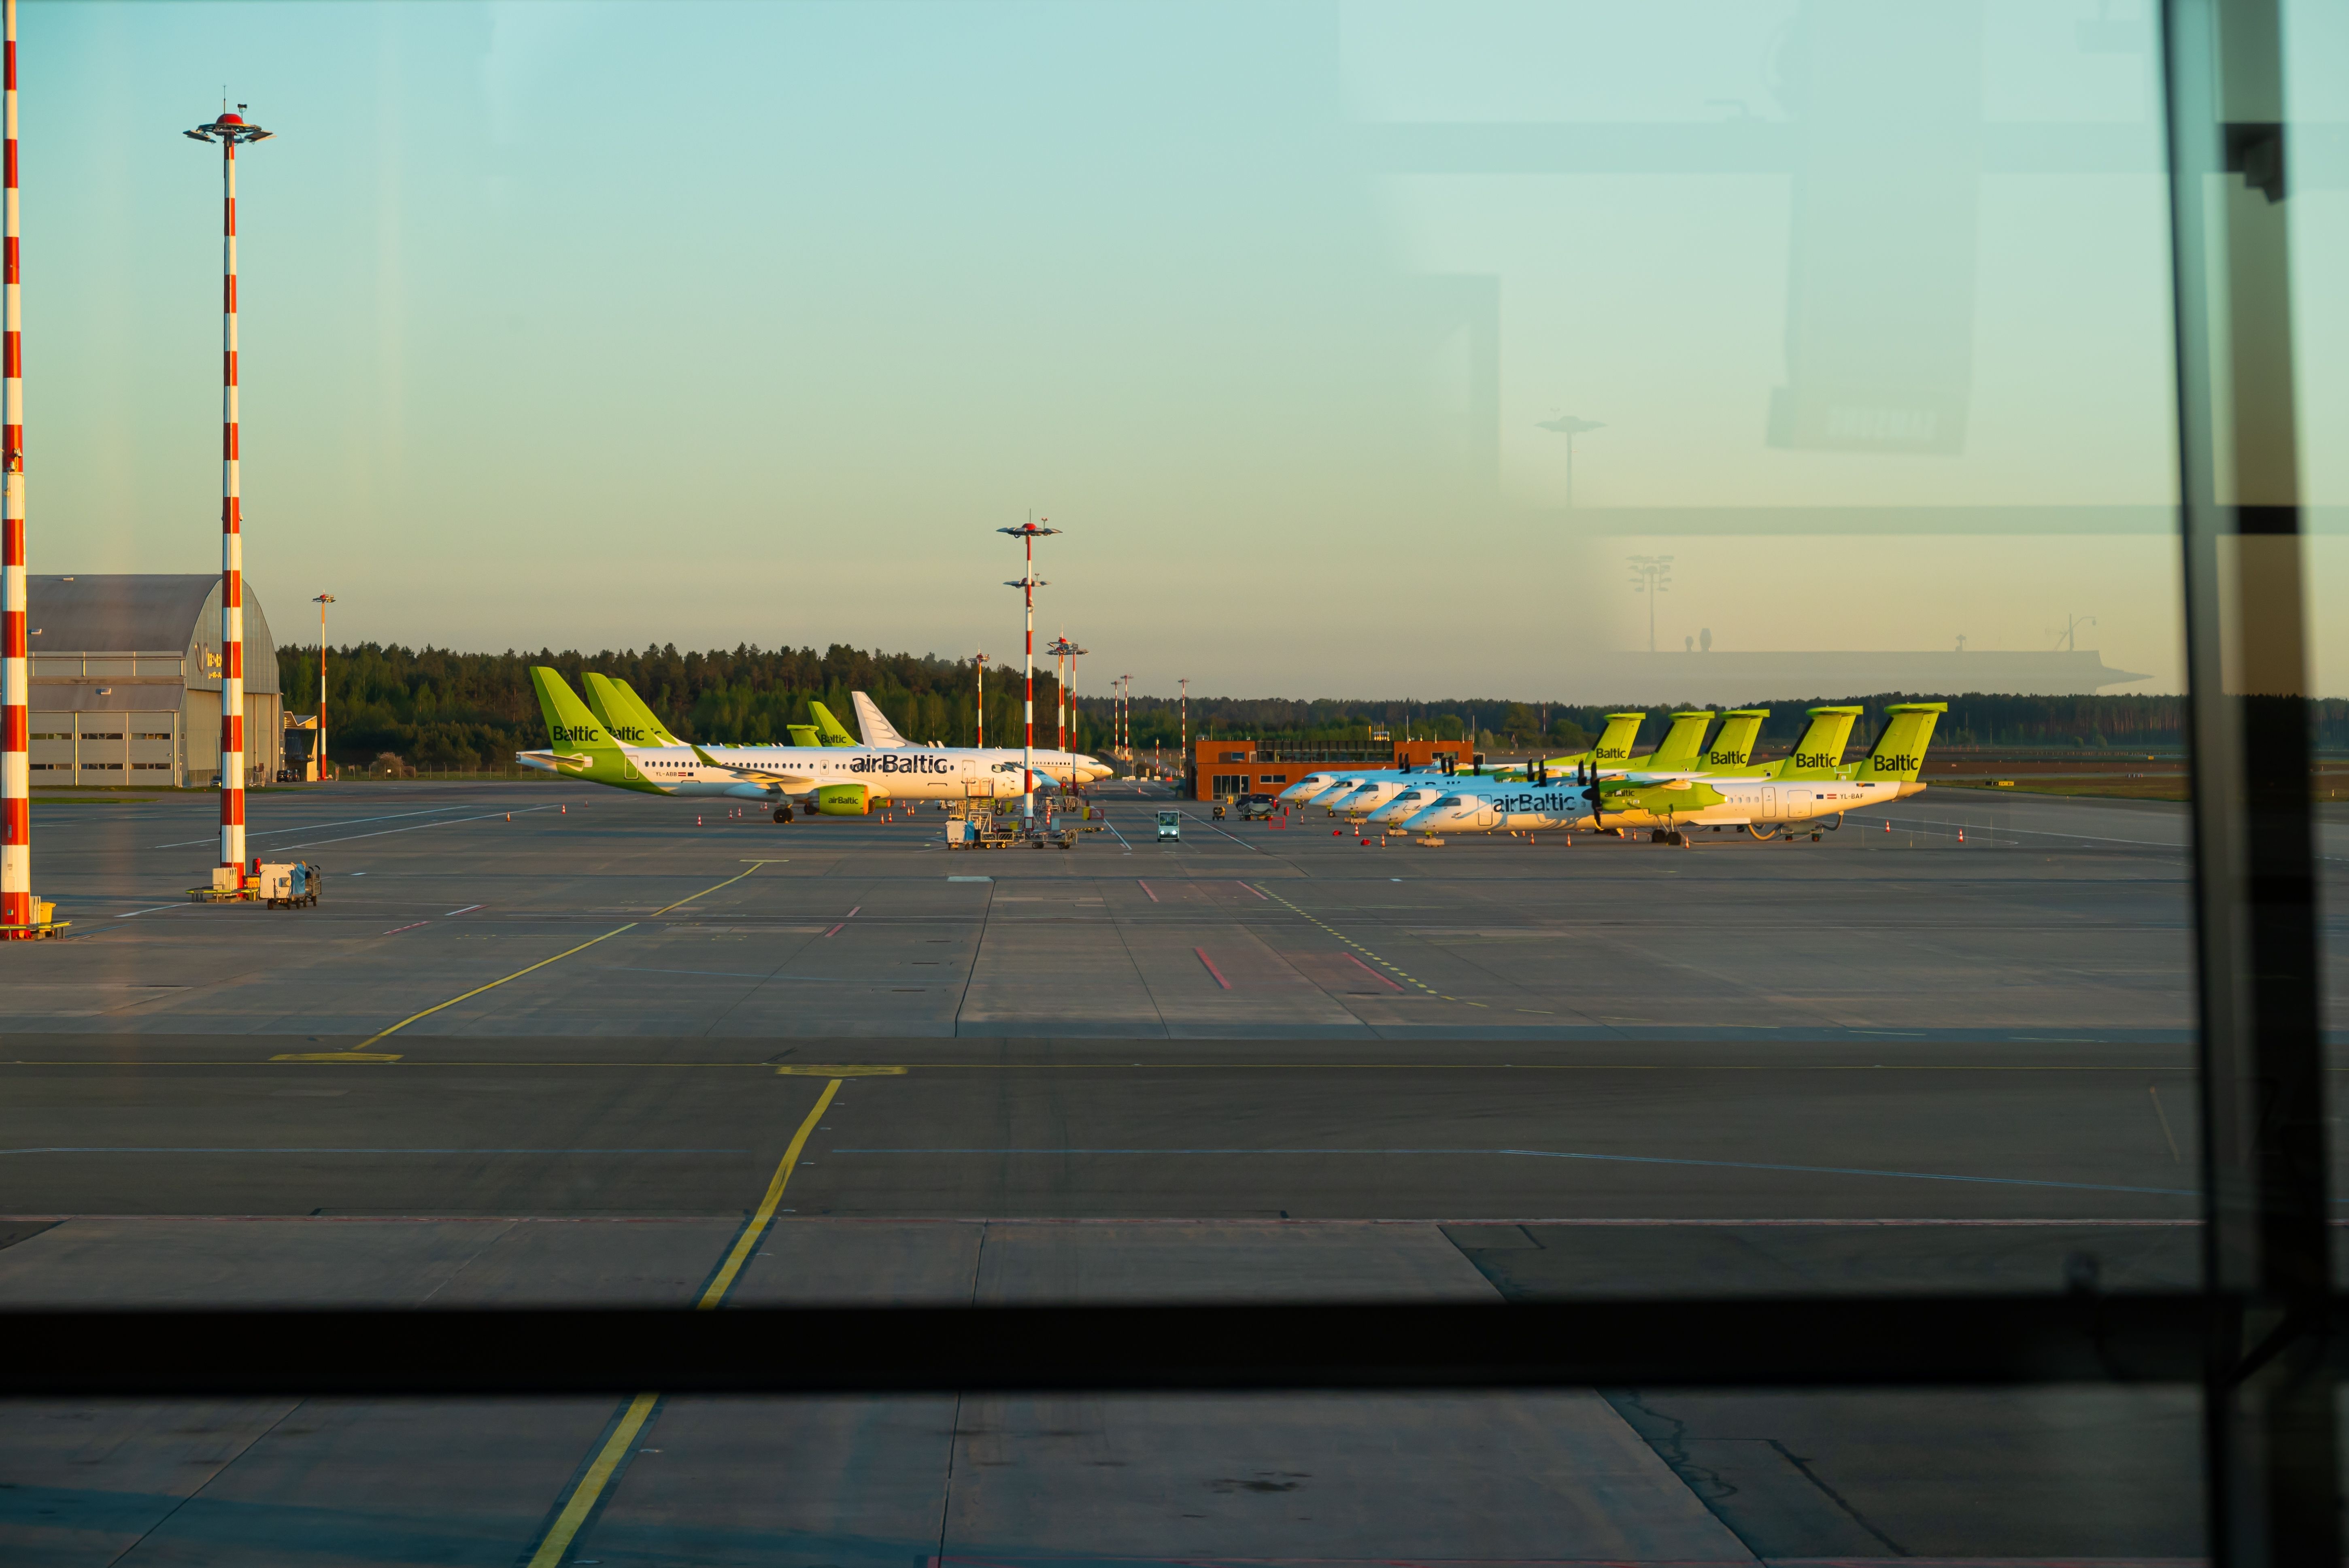 A fleet of airBaltic jets